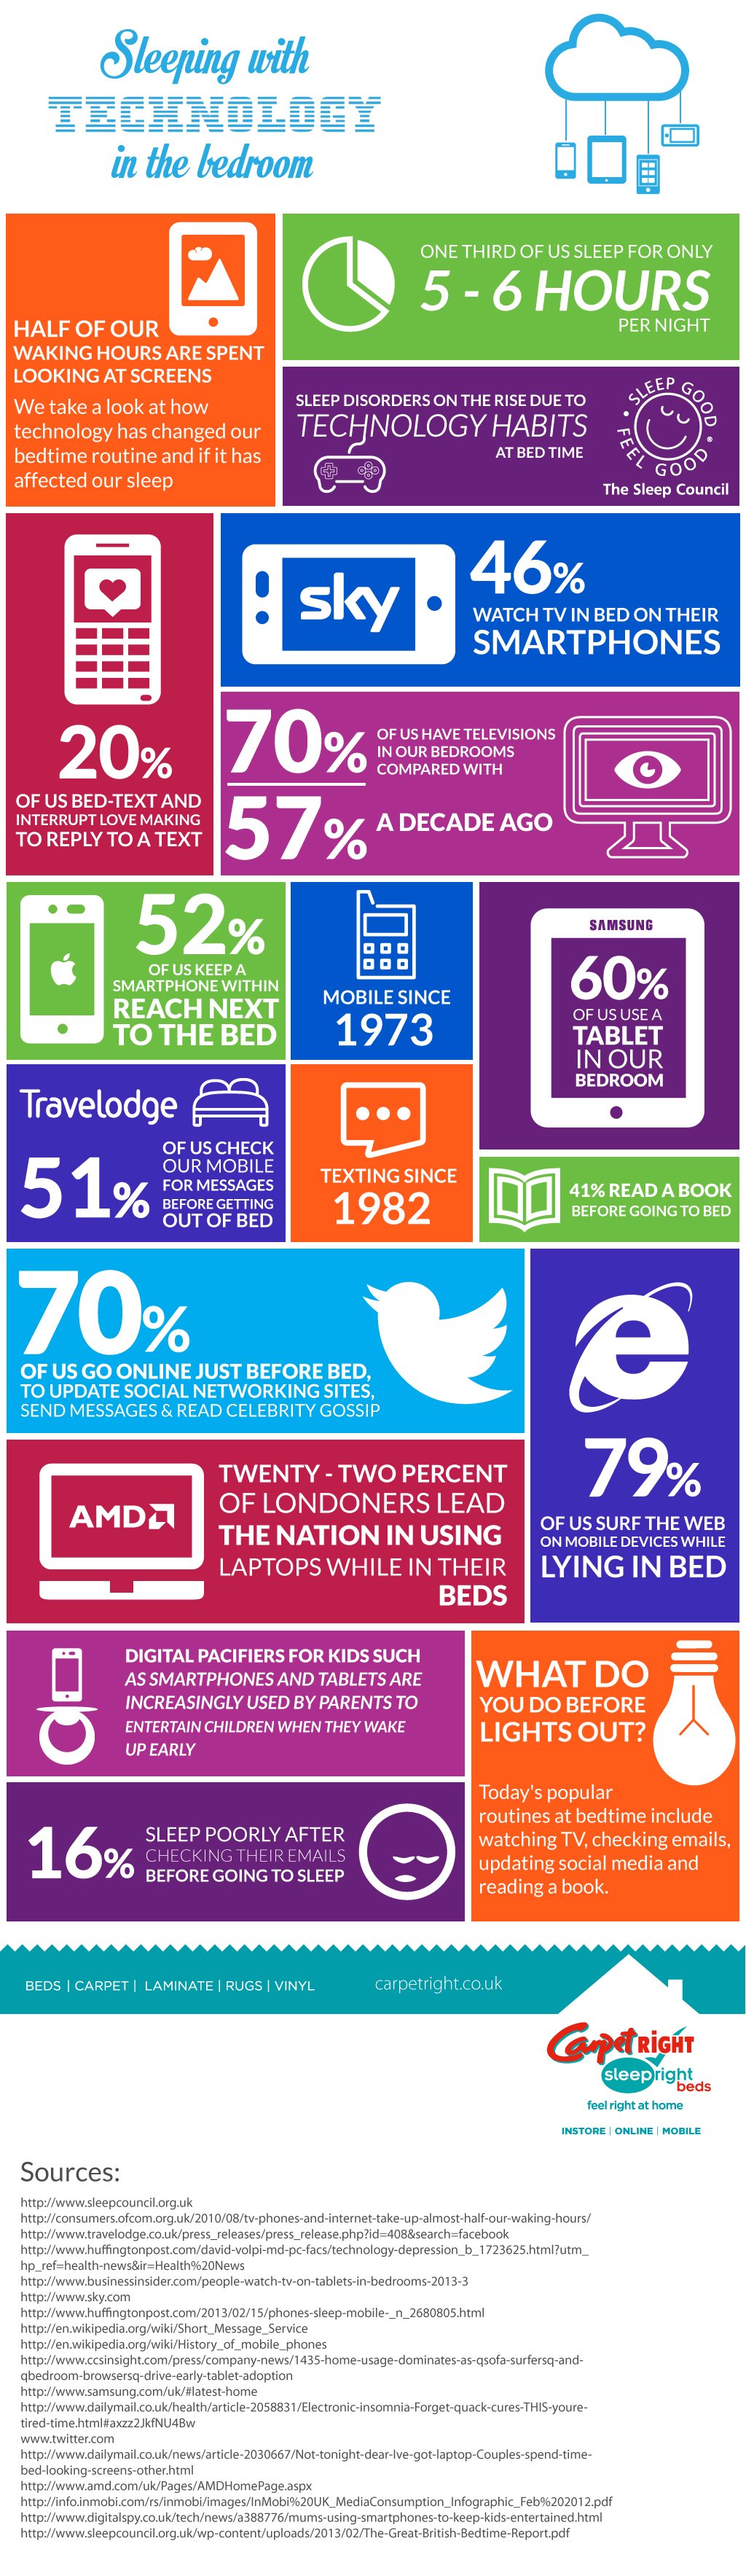 sleeping with technology in the bedroom infographic